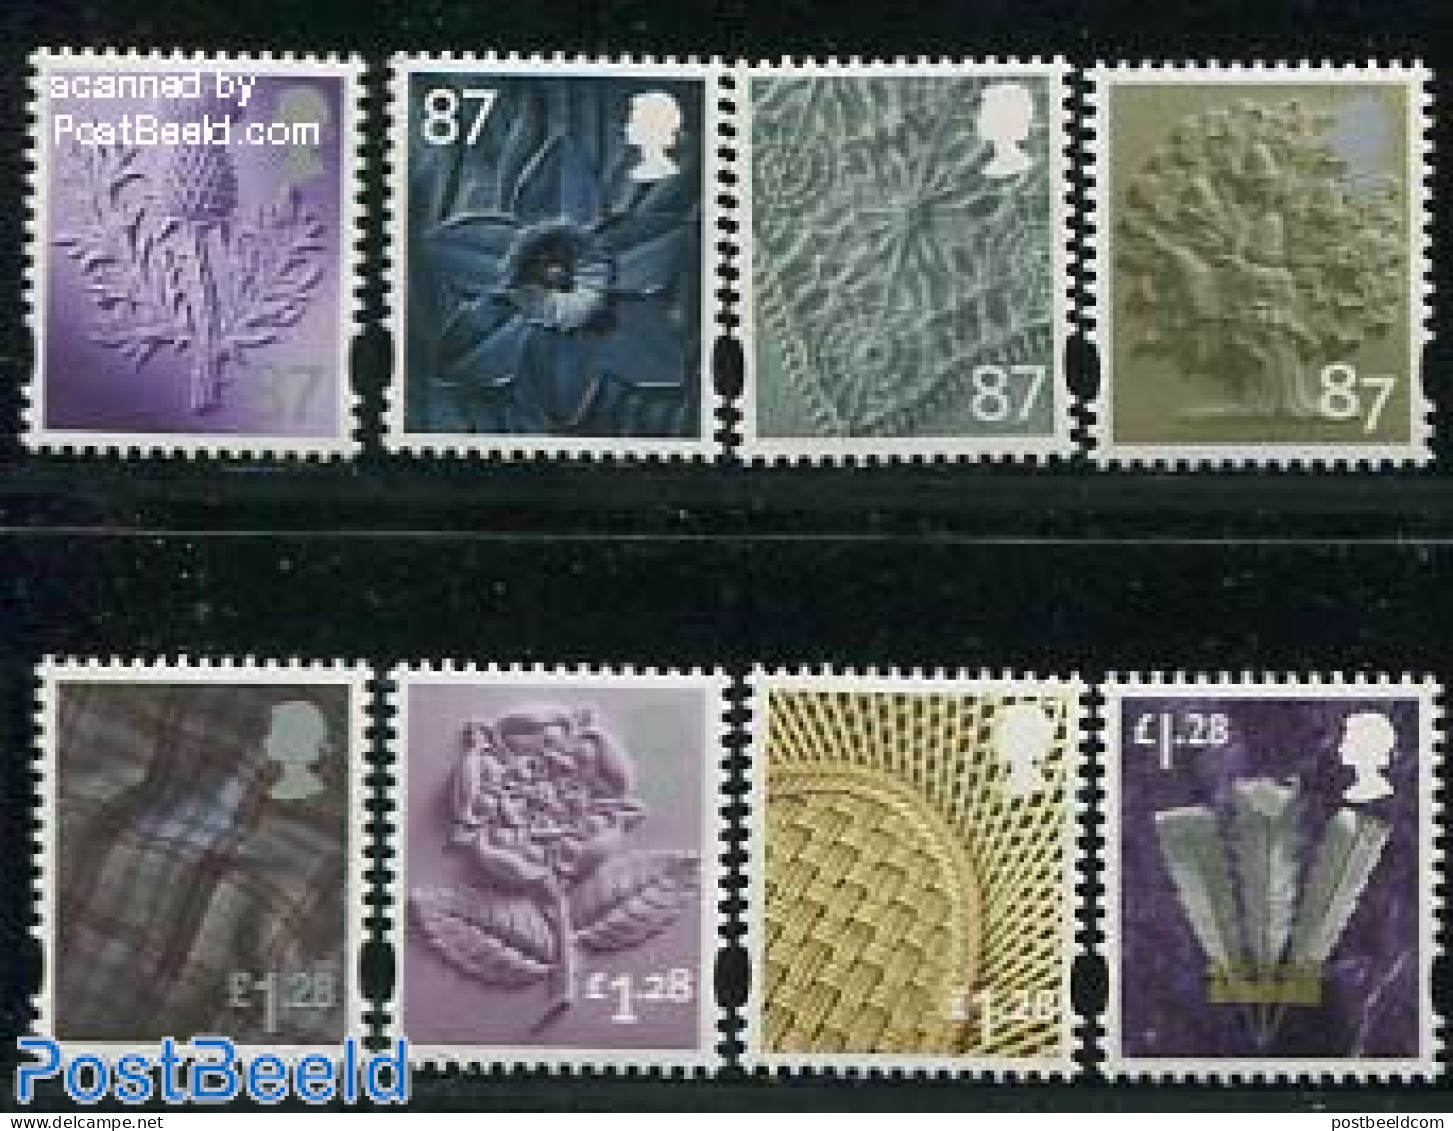 Great Britain 2012 Regional Stamps 8v, Mint NH - Neufs